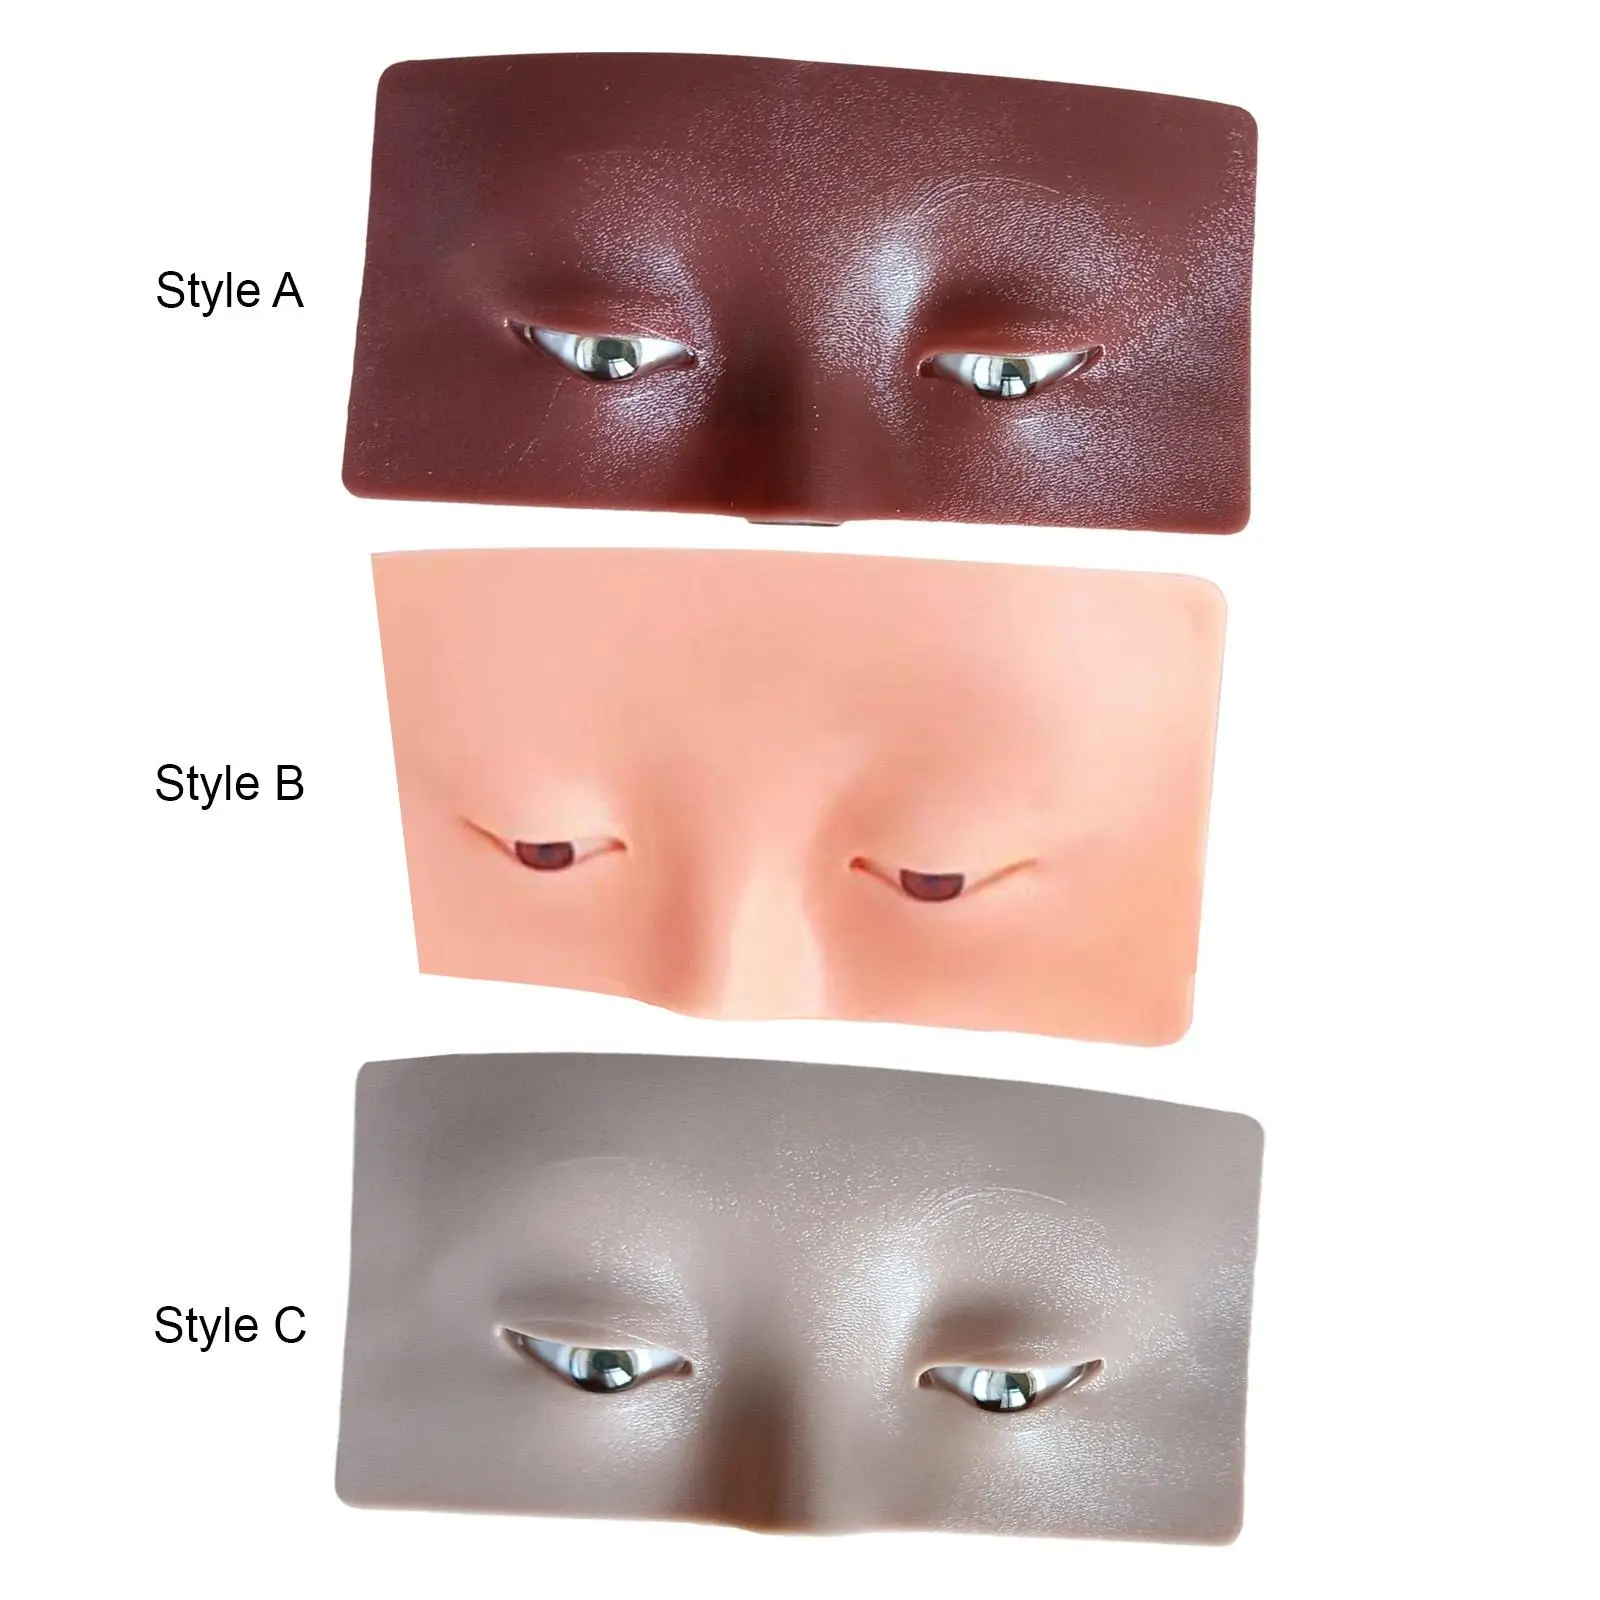 Eye Makeup Practice Face Salon Home Use Durable The Perfect Aid to Practicing Makeup Accessories for Professional Makeup Artists